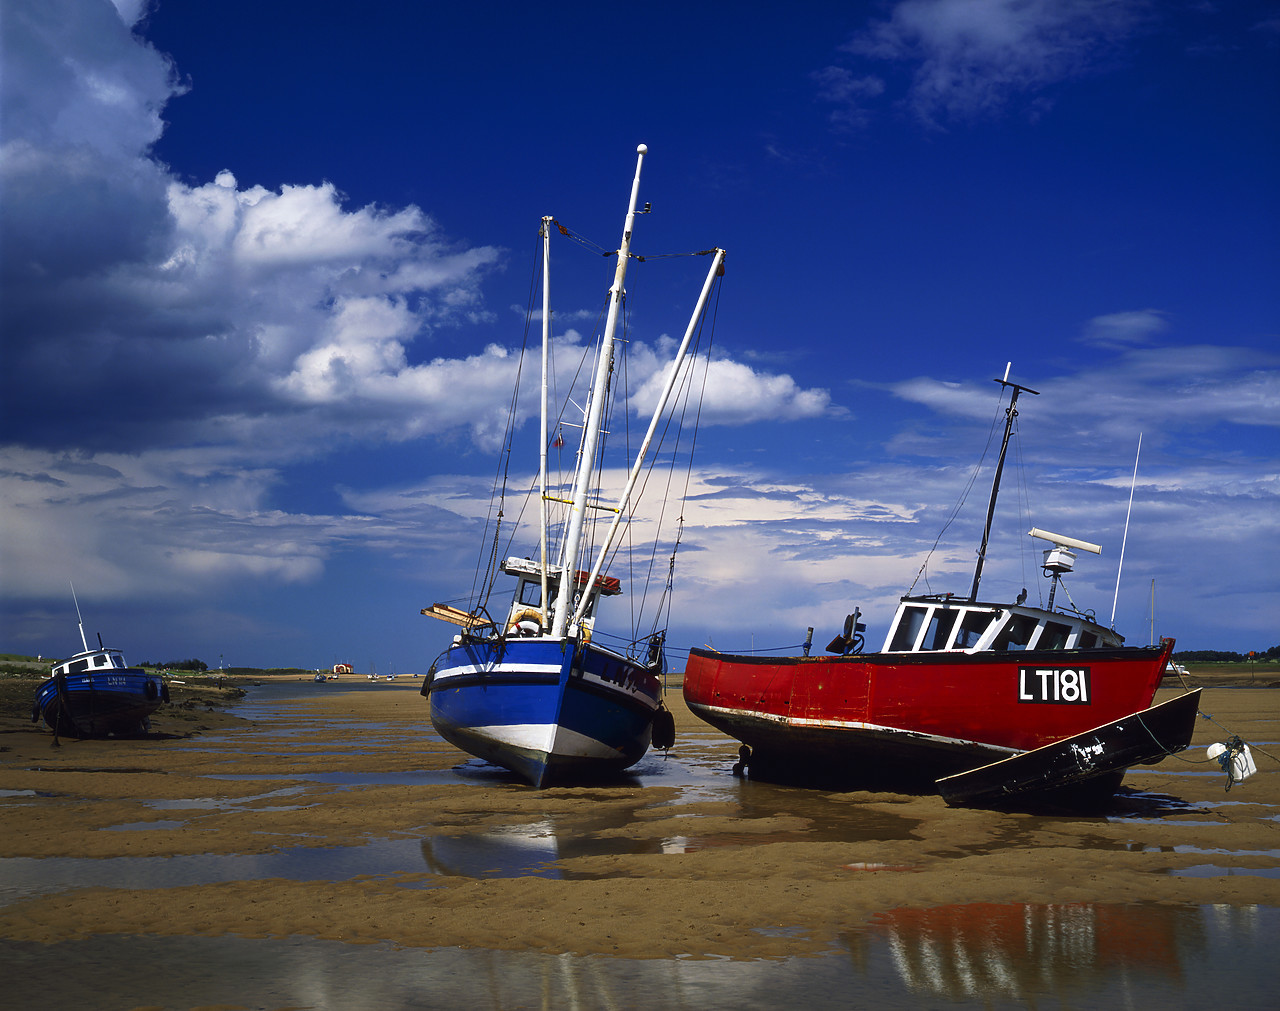 #881393-1 - Tide Stranded Fishing Boats, Wells-Next-The-Sea, Norfolk, England